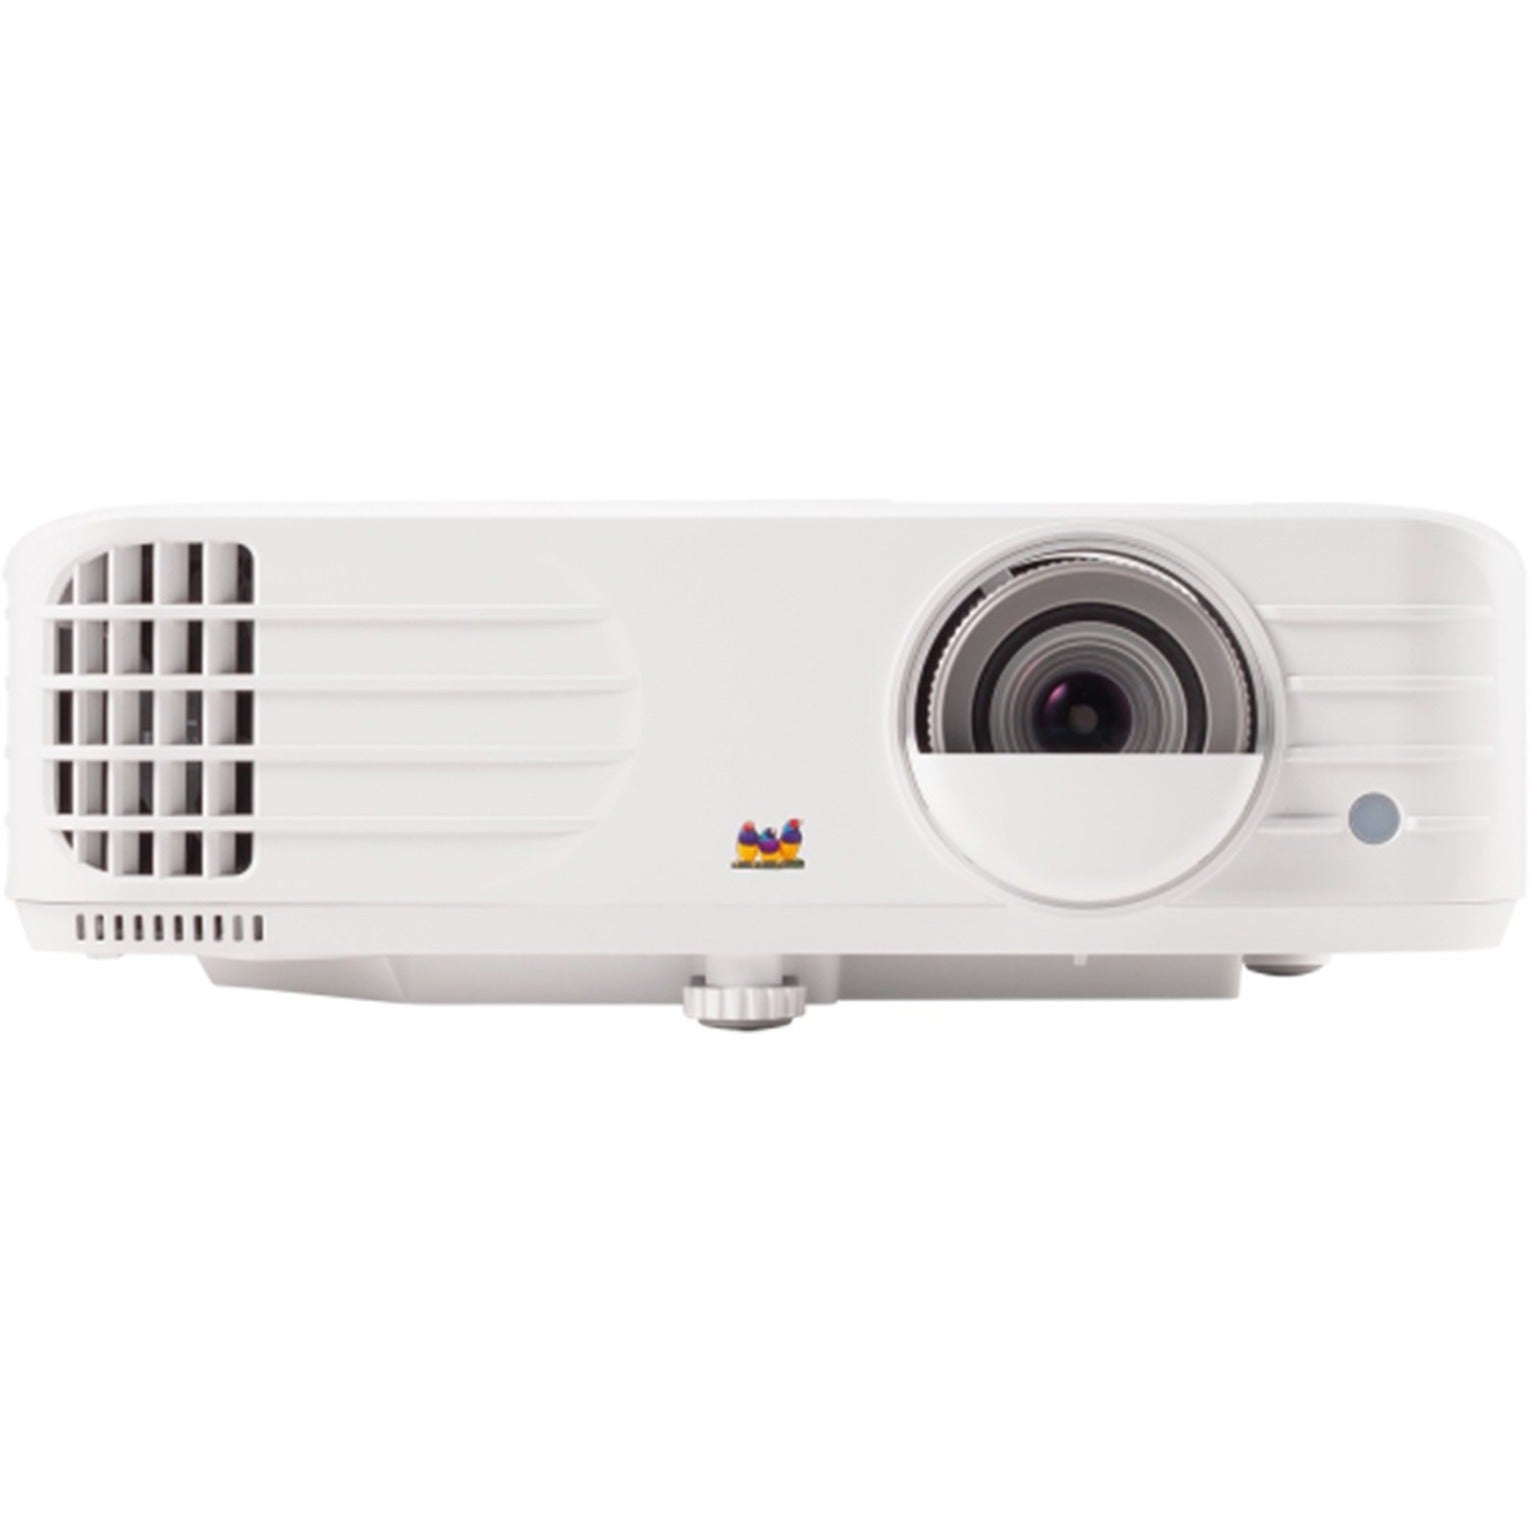 ViewSonic PX703HDH 1080p Home Theater Projector, 3500 Lumens, Low Input Lag